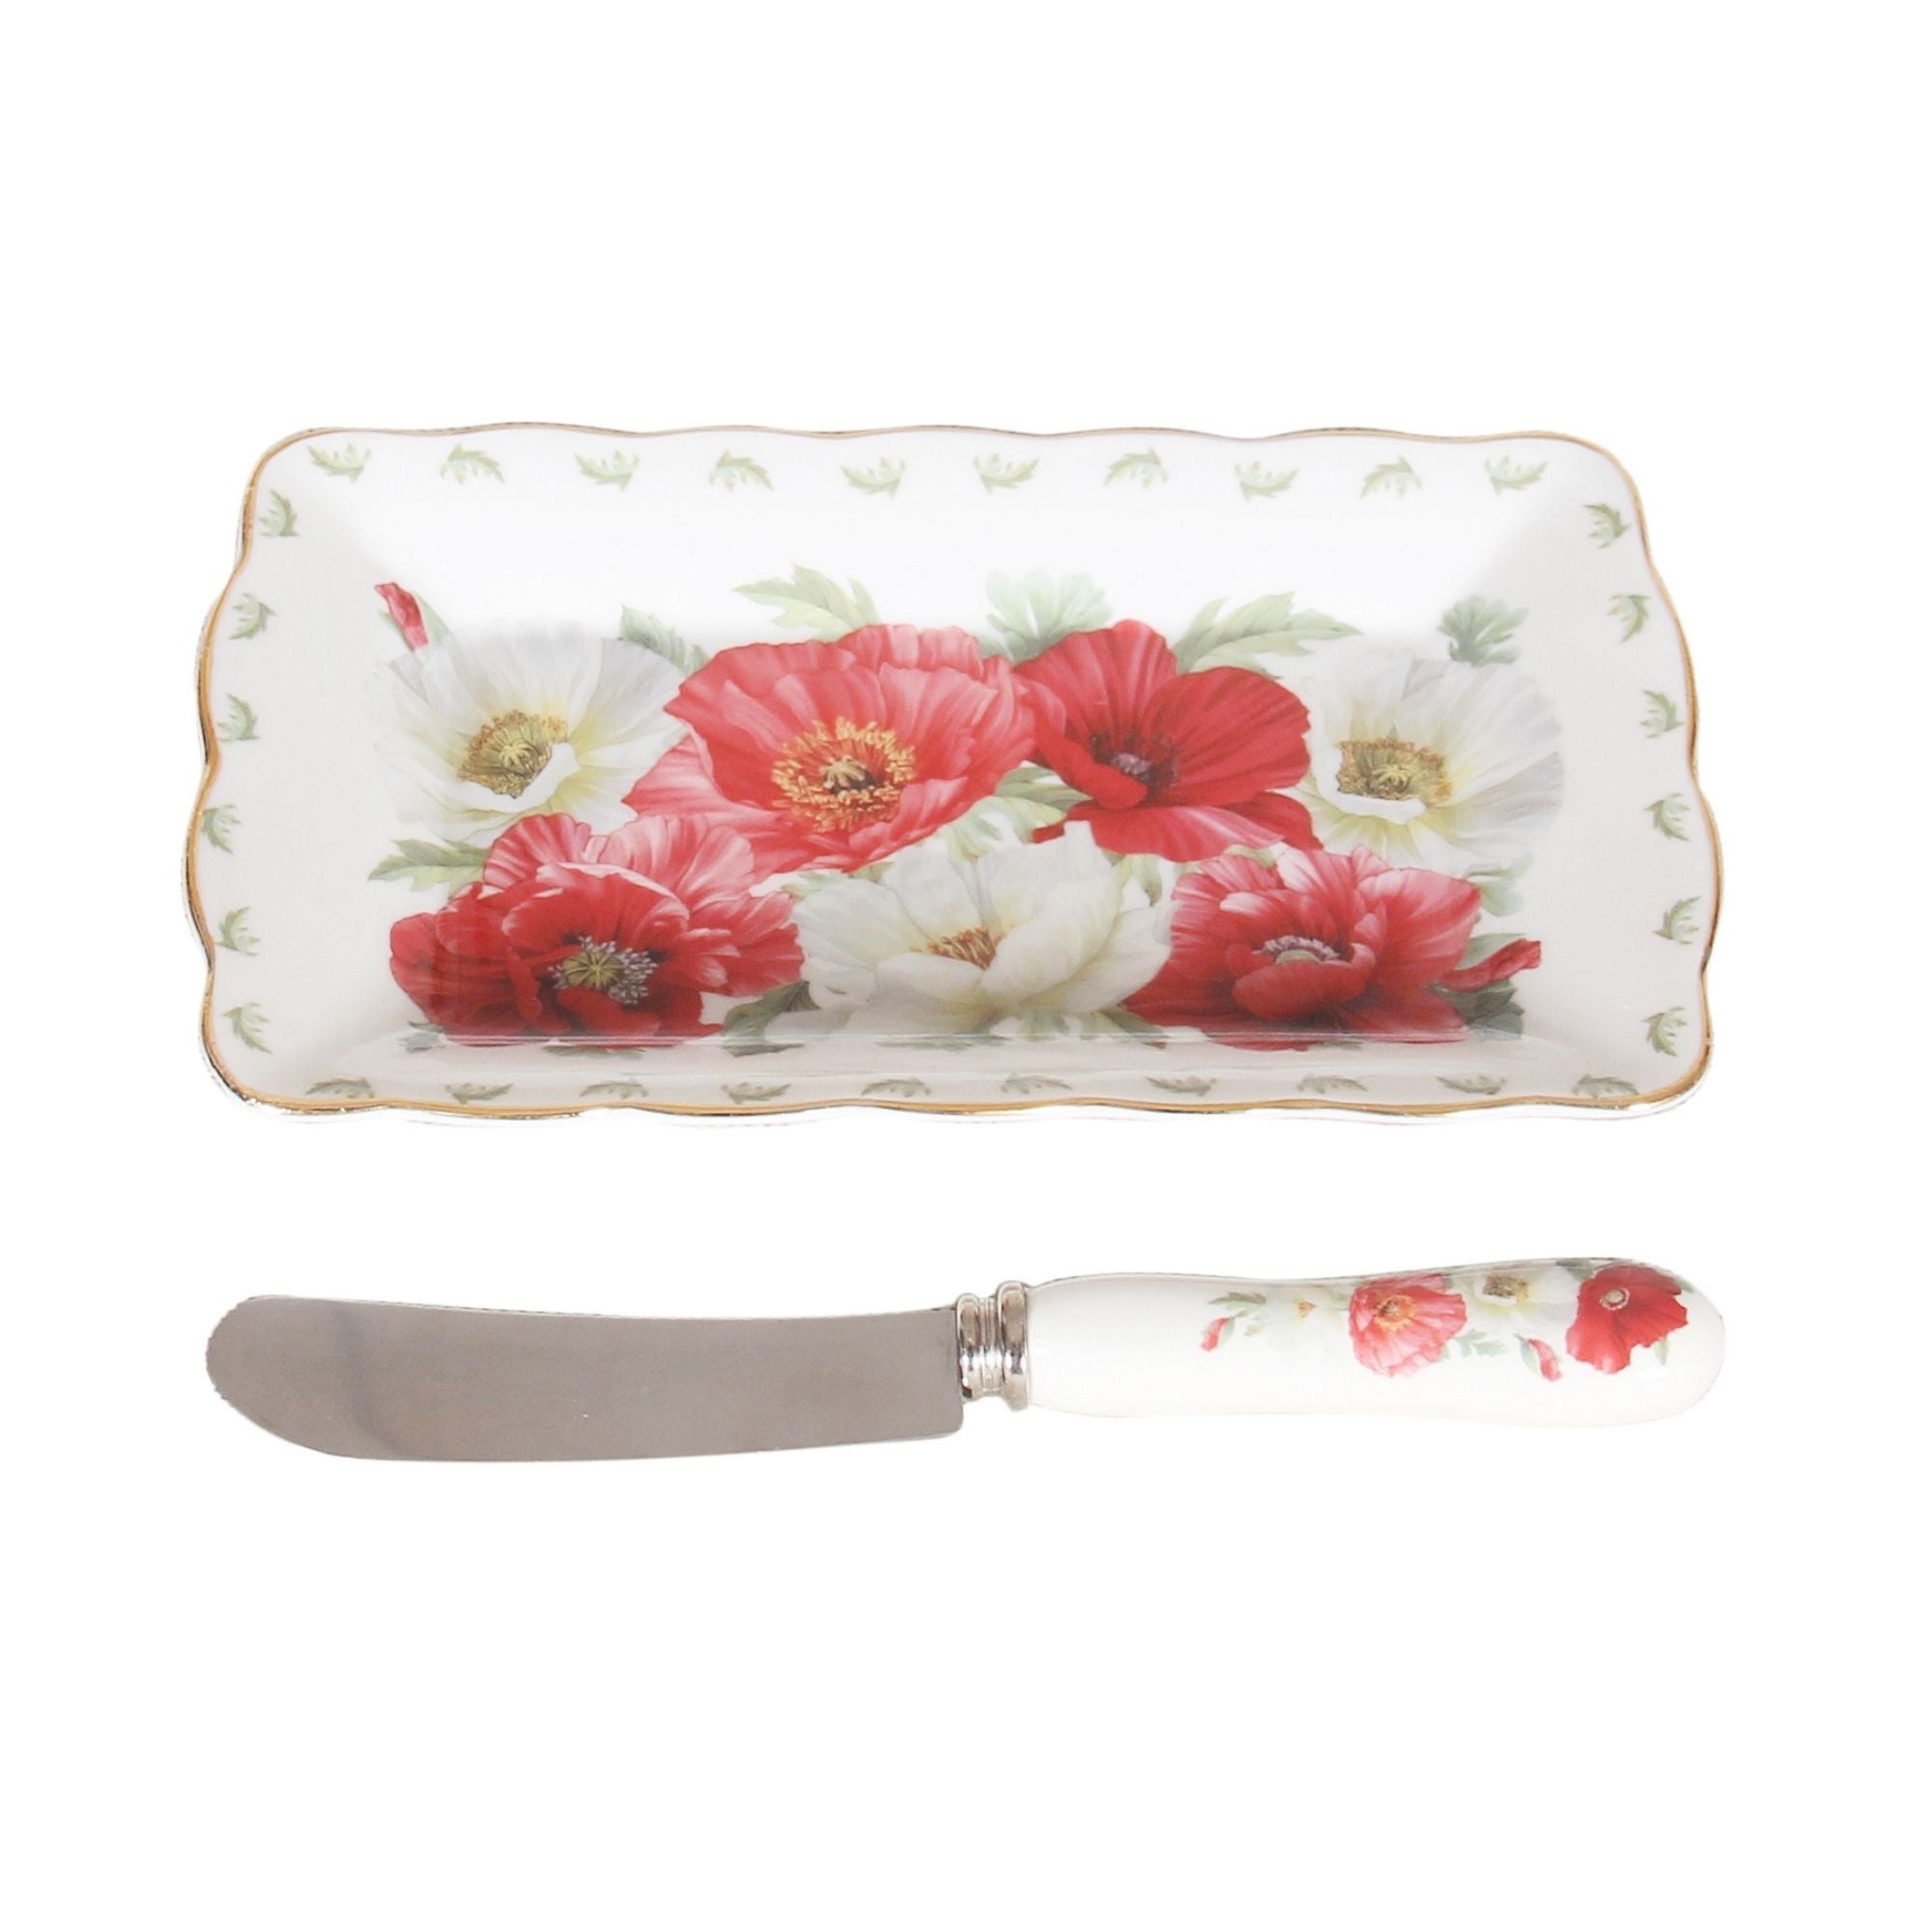 Cheese Platter Set with Knife - New Poppies on White Fine Bone China - Gift Box - Dollars and Sense